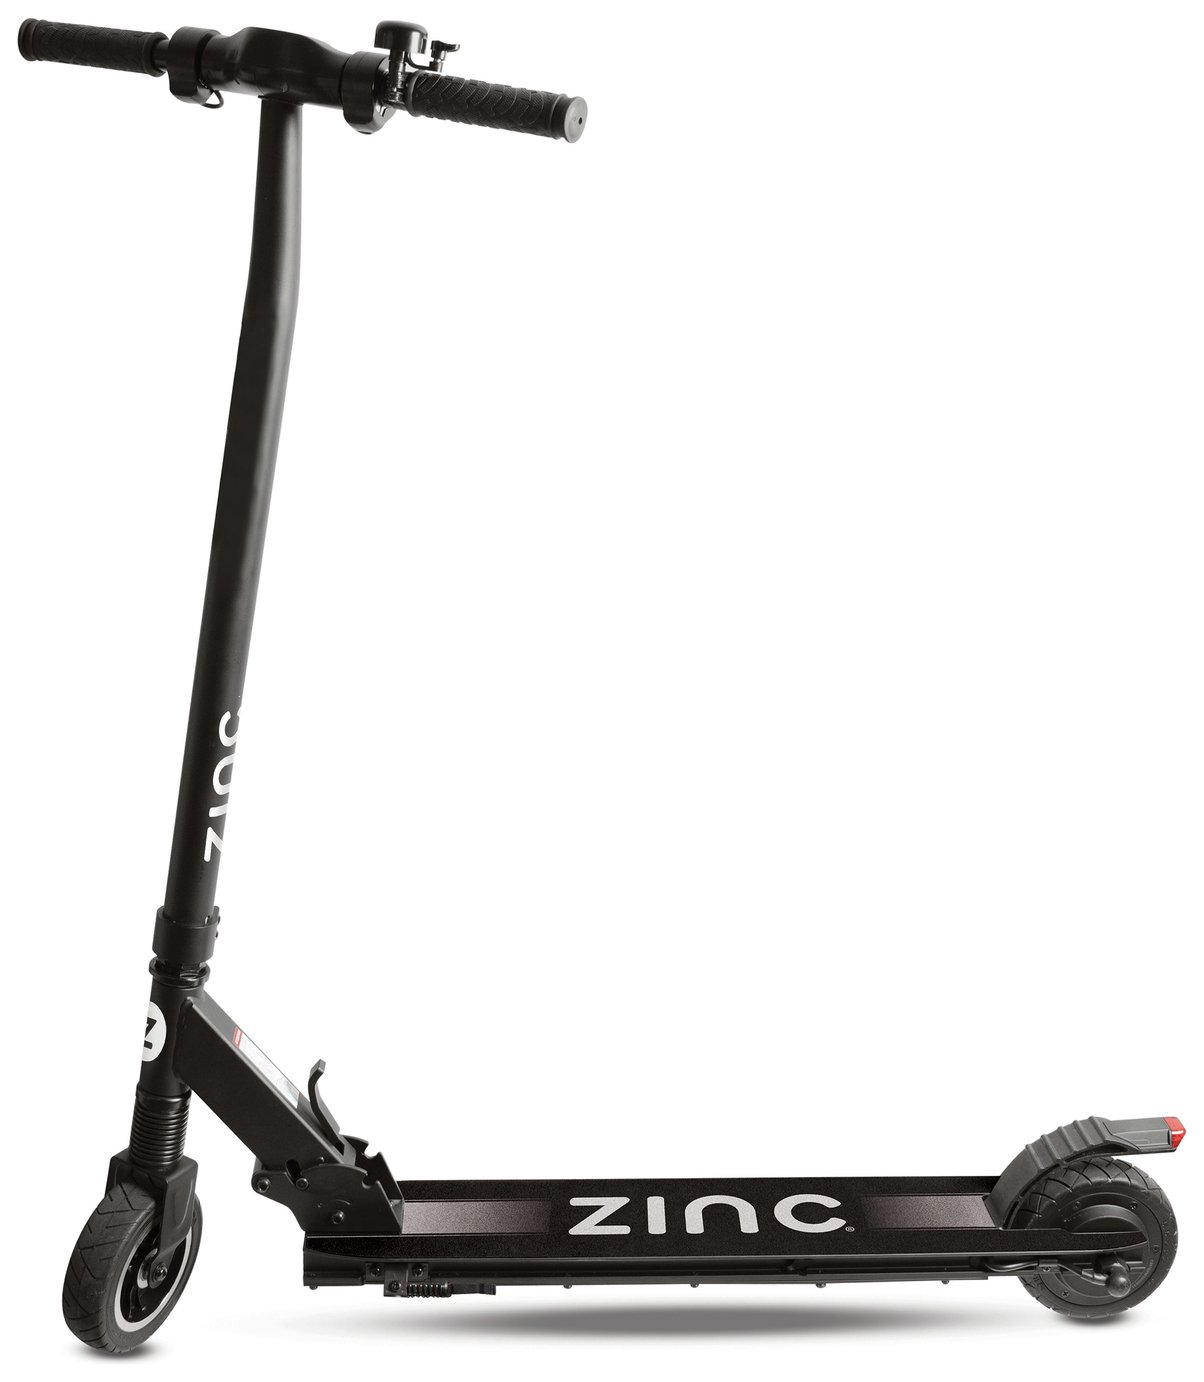 Zinc Eco Electric Scooter Review